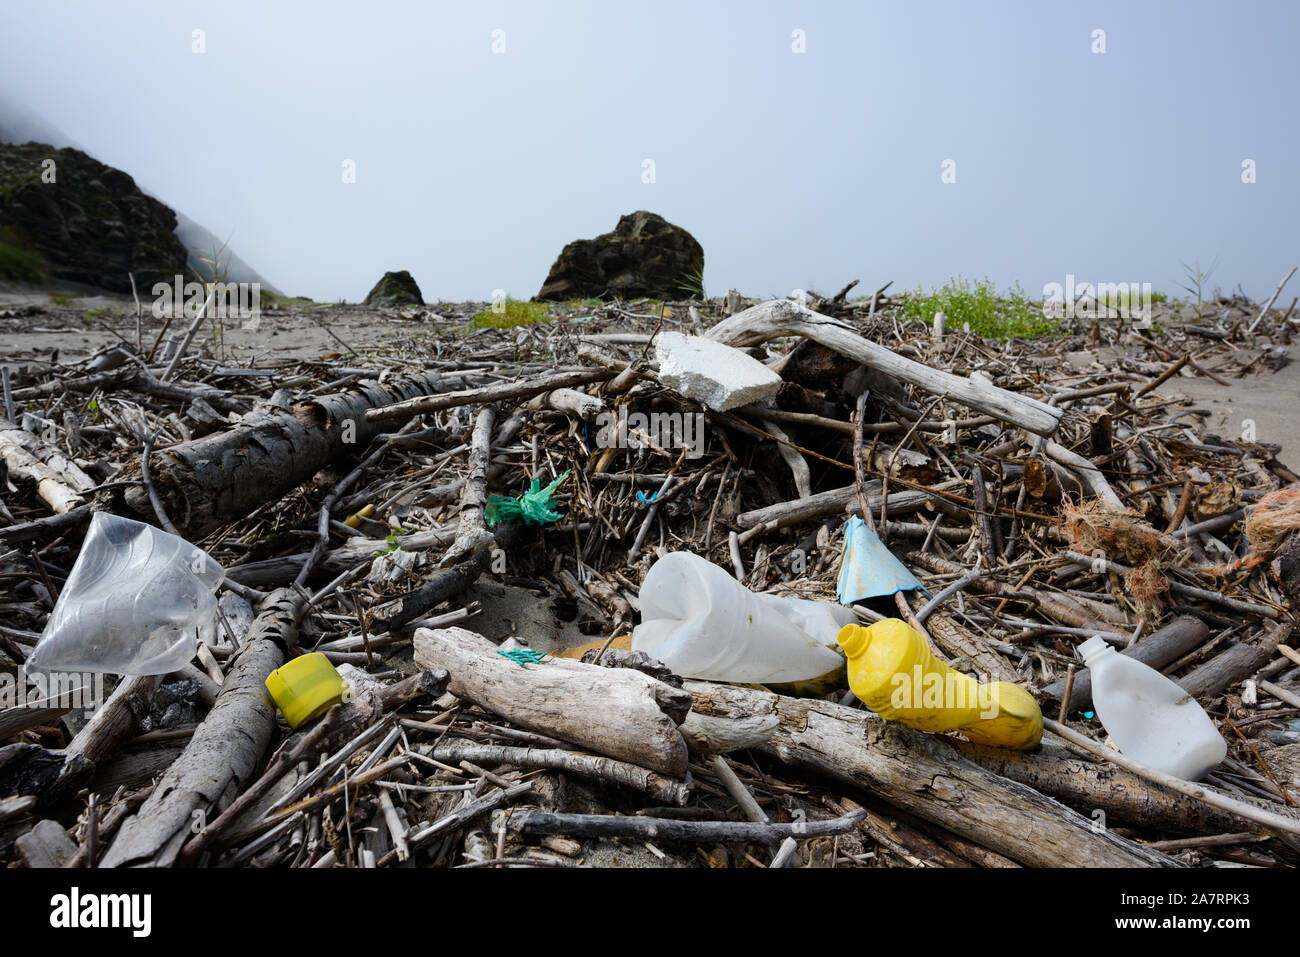 Plastic bottles and rubbish waste on ocean beach. Human caused enviroment trash pollution. Stock Photo